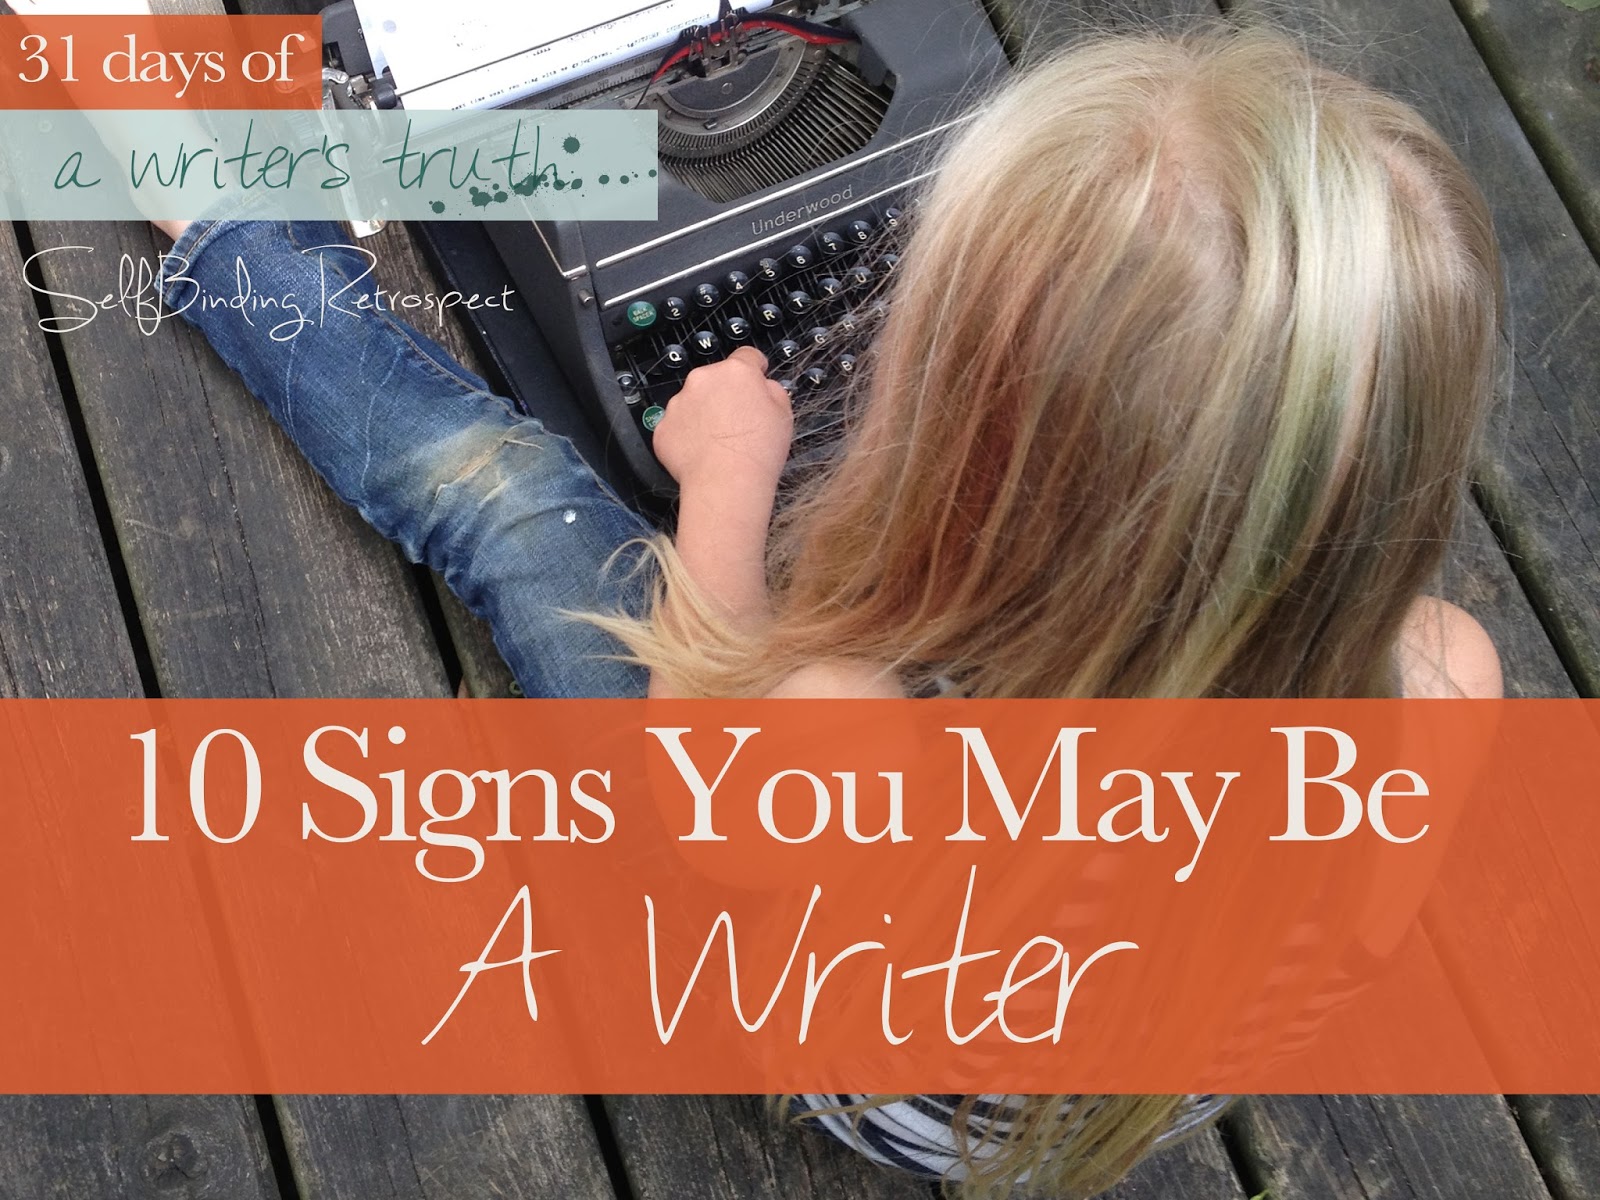 10 signs you may be a writer #write31days Alanna Rusnak